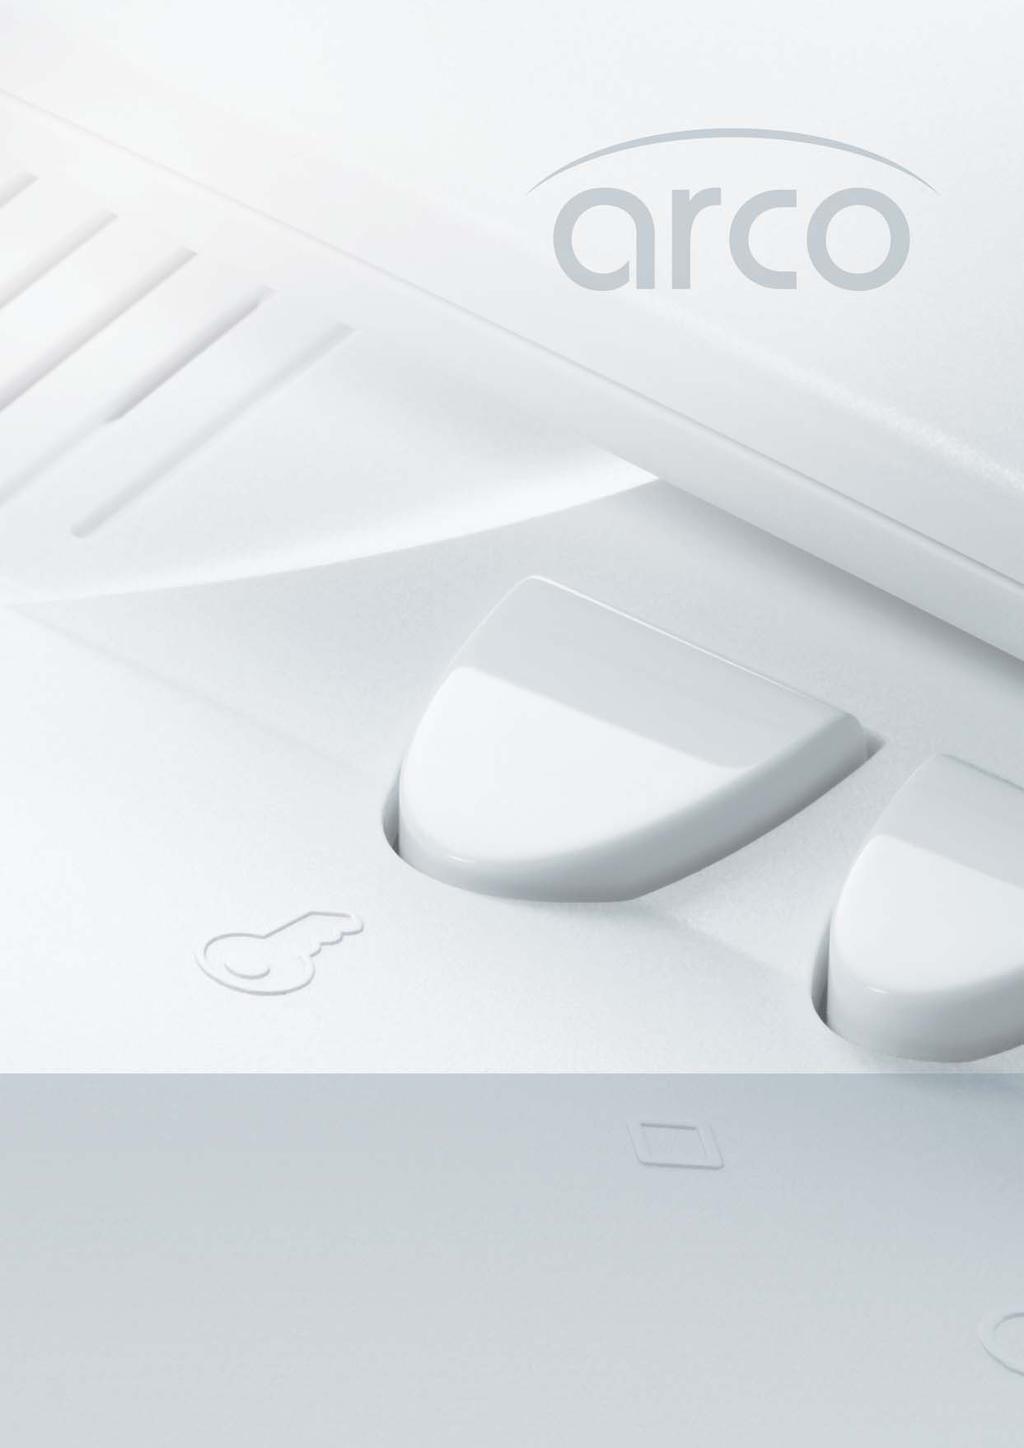 A well-structured, smooth style: Arco is a video door phone made simple.